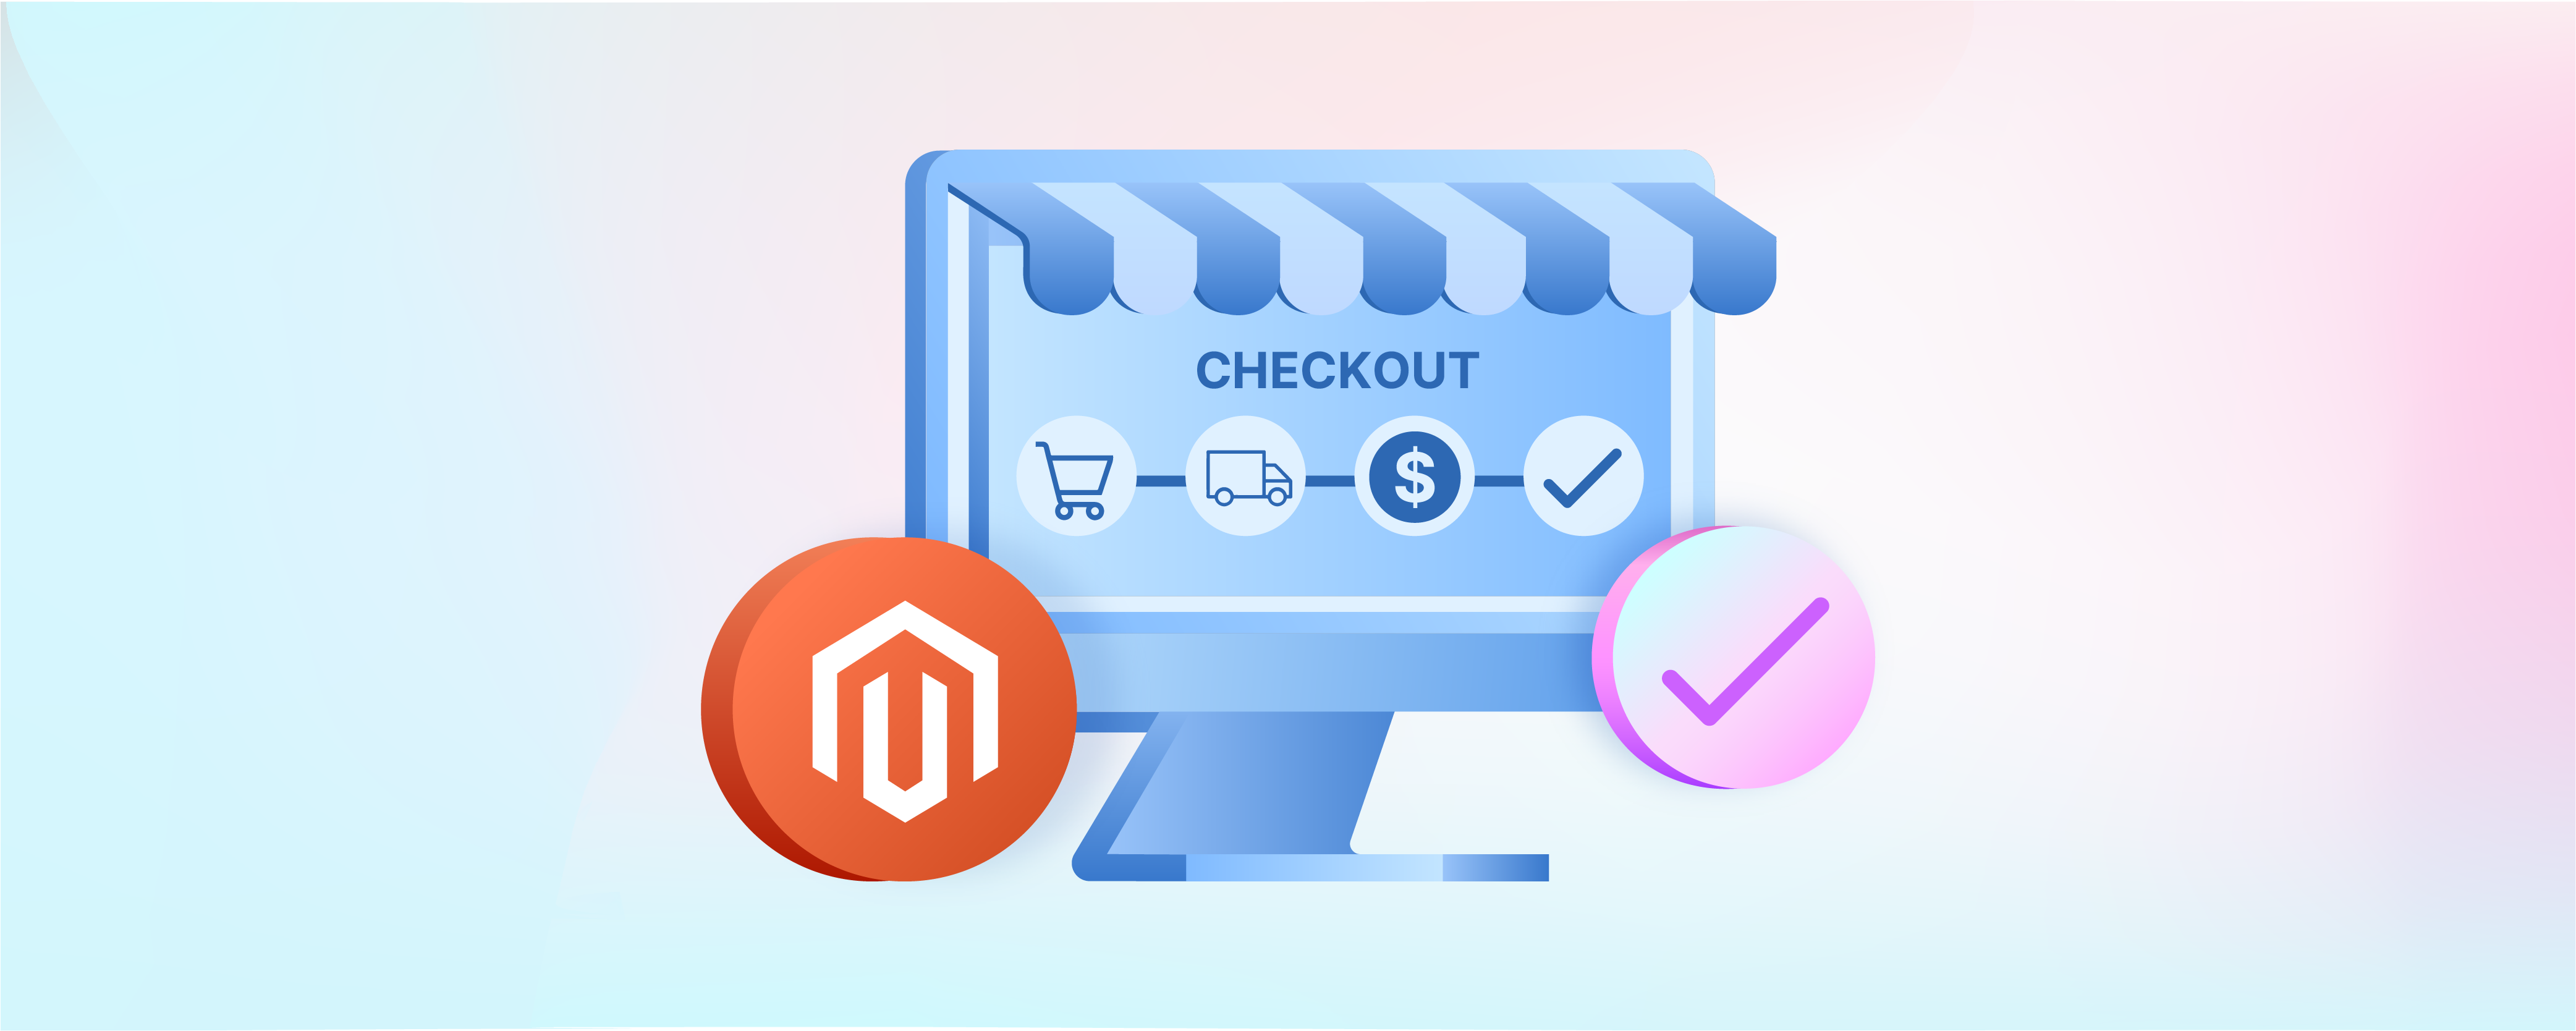 How to Add Magento 2 Checkout in Easy Steps